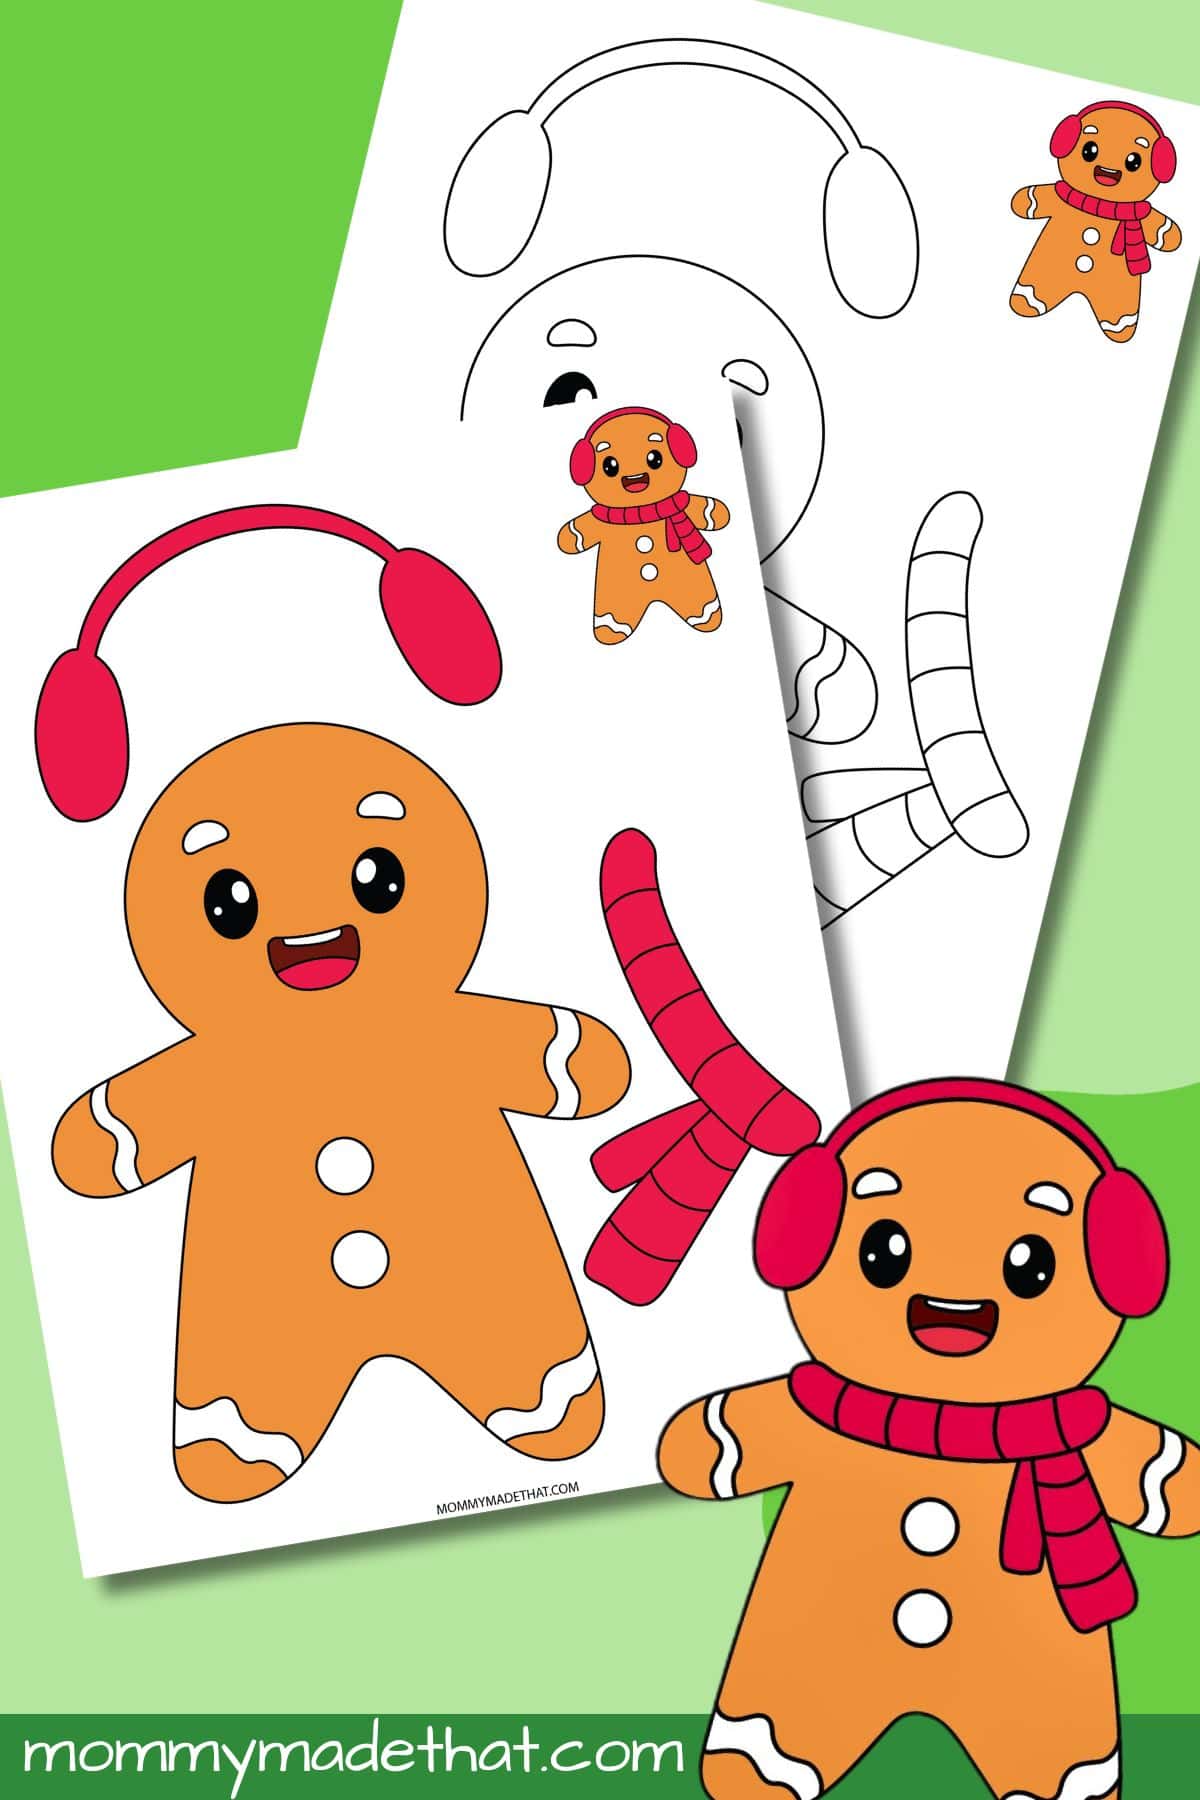 Printable Cut and Paste Gingerbread Man Craft